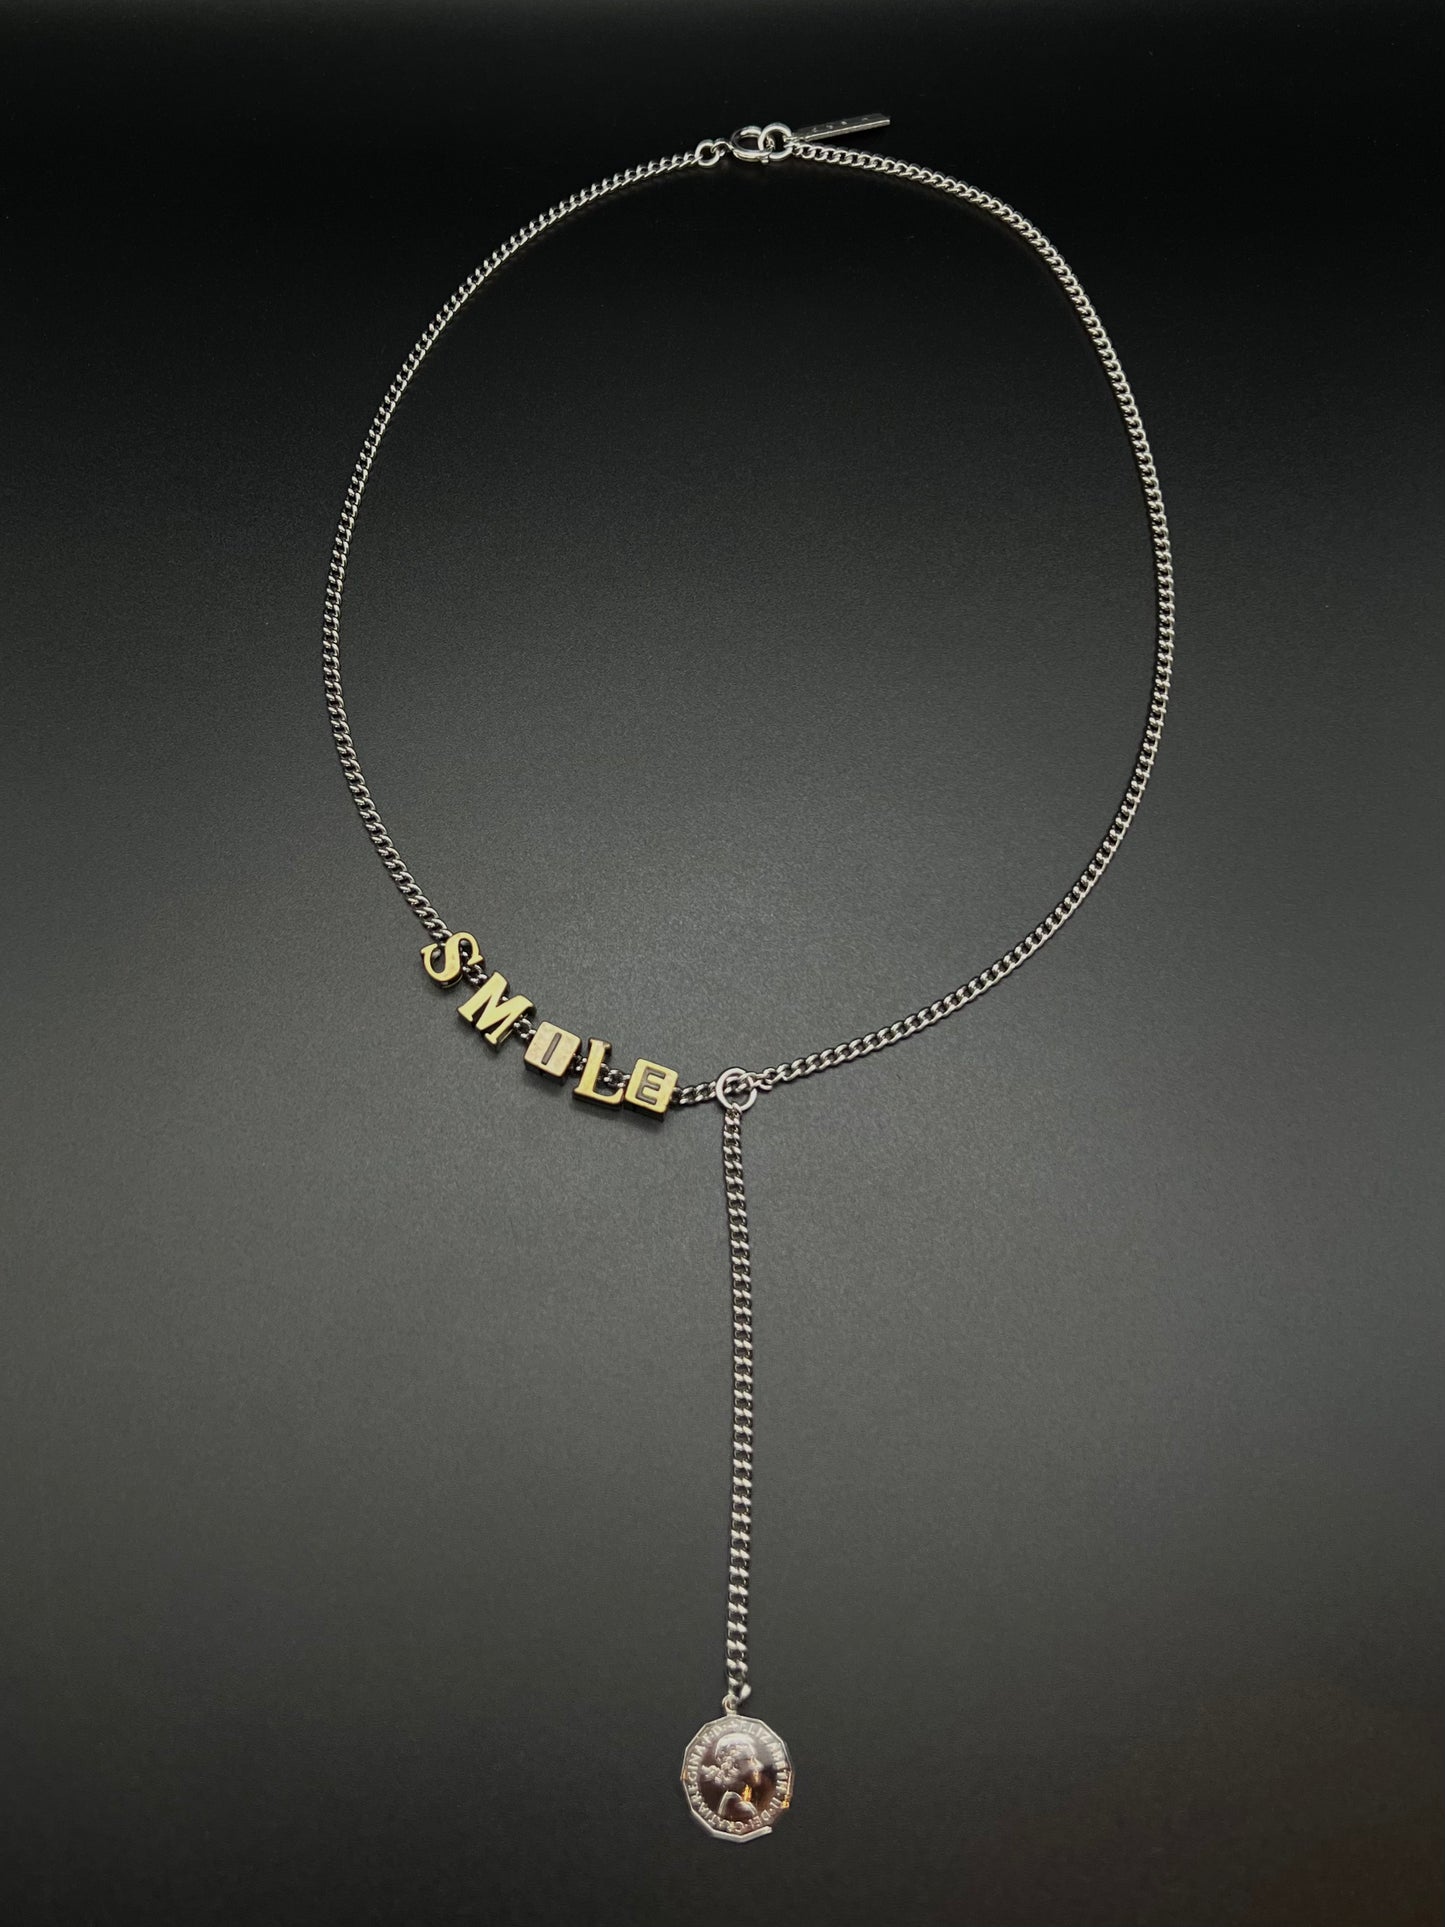 "SMILE" necklace